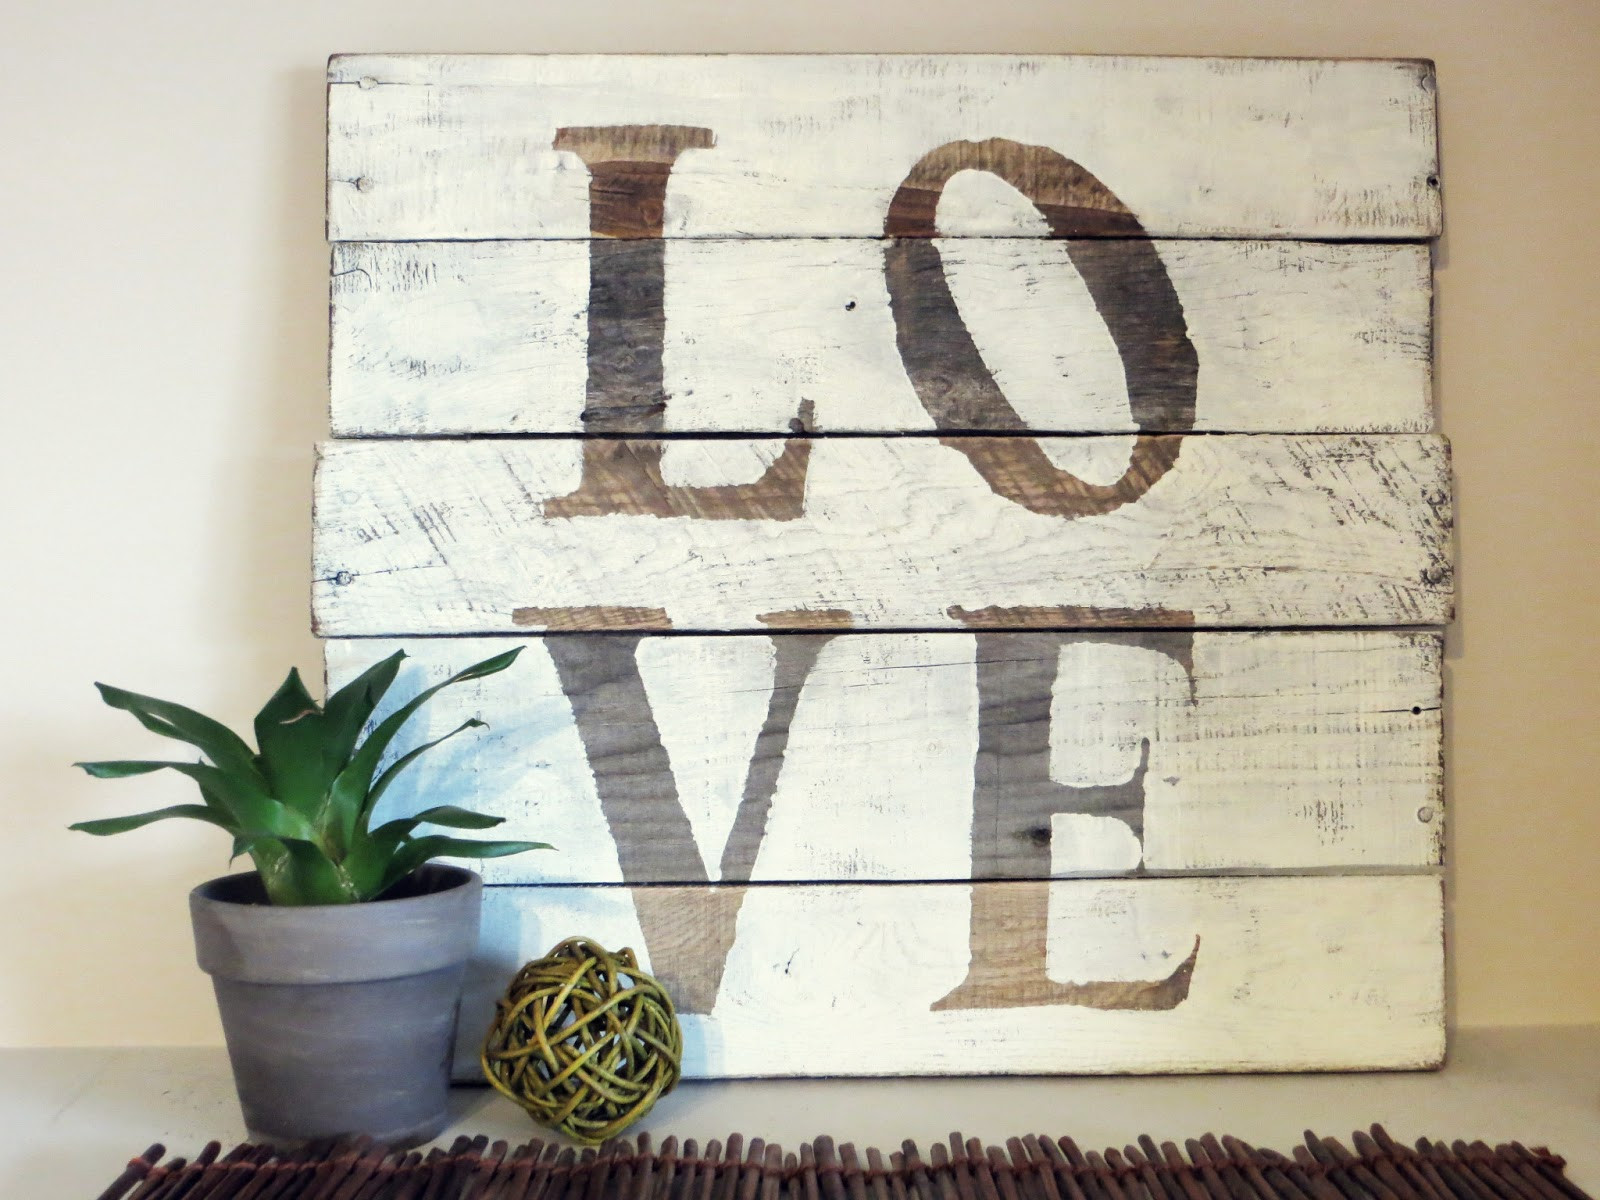 Wooden Sign Craft Ideas
 Namely Original Pallet Wood Sign Ideas